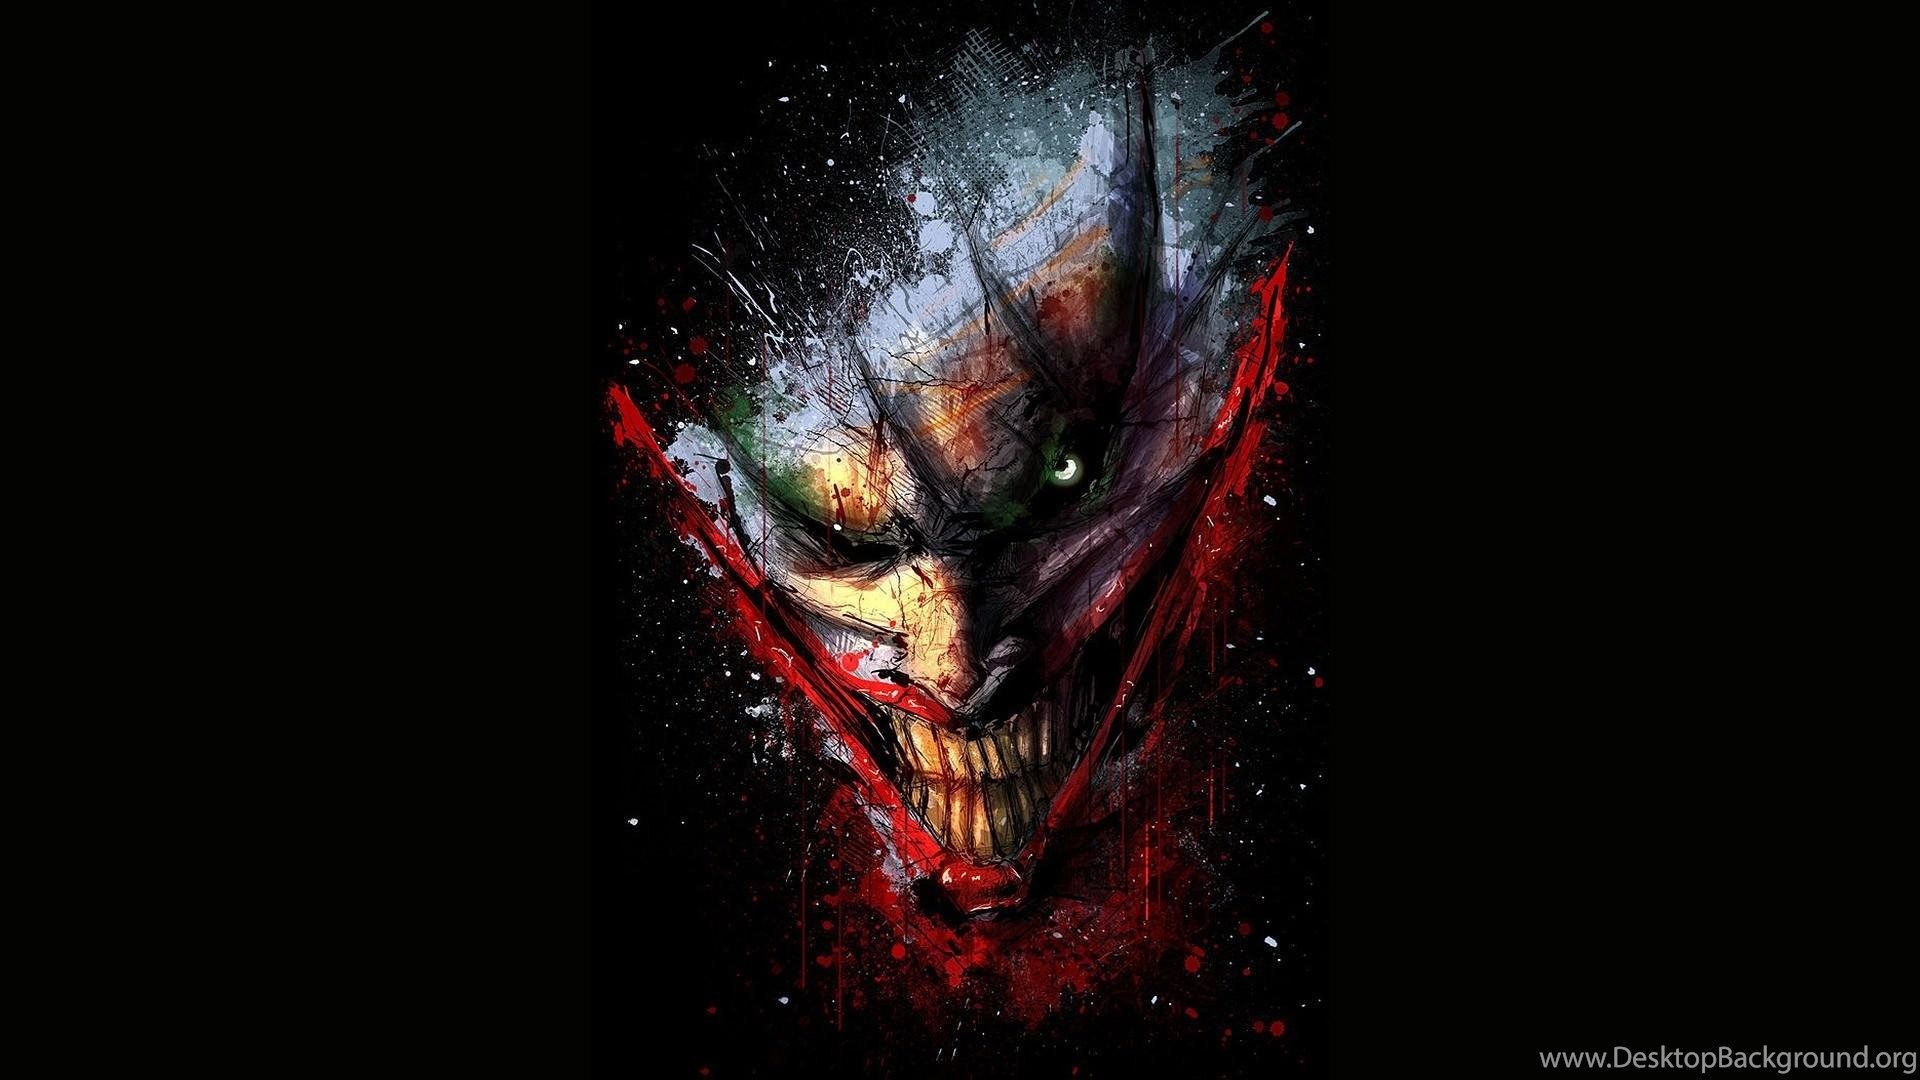 Why so Serious Wallpaper Free Why so Serious Background